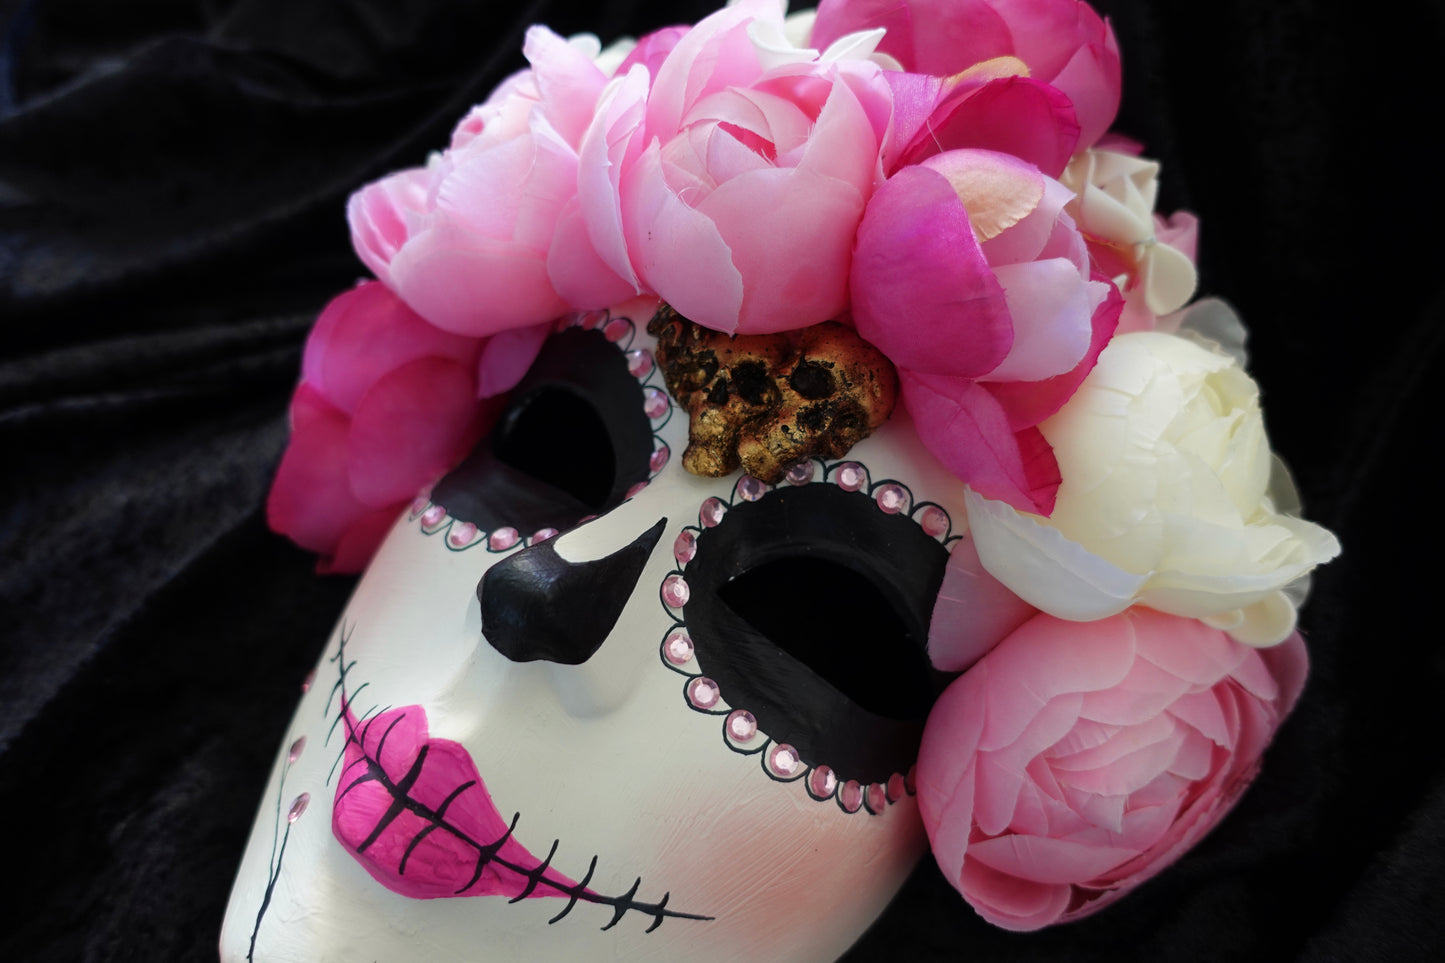 Catherine mask original model of the day of the death in Mexico